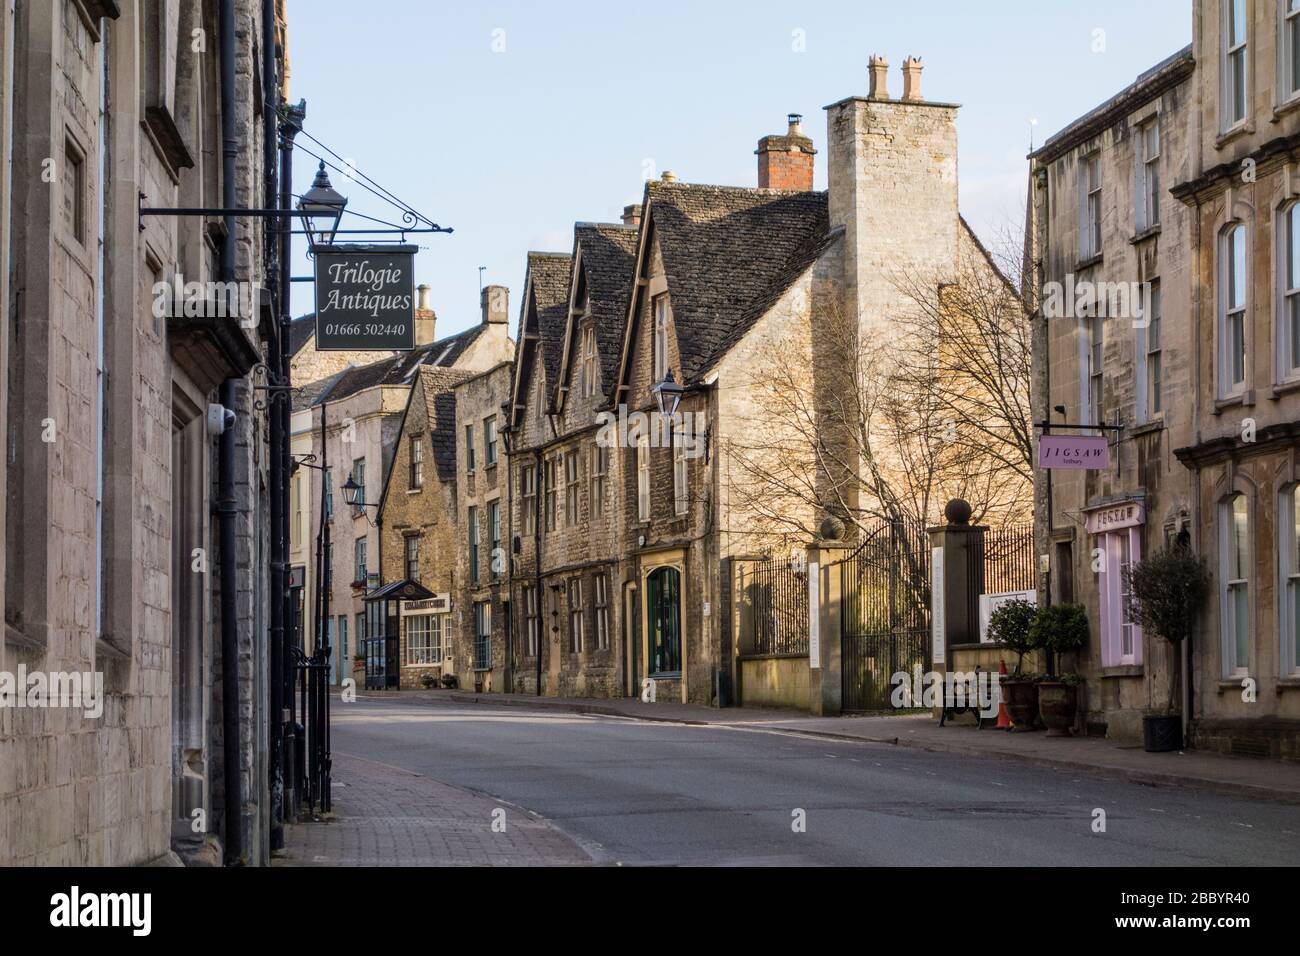 Empty street with no traffic and people due to lockdown caused by Covid 19 pandemic, Tetbury, Gloucestershire, UK Stock Photo